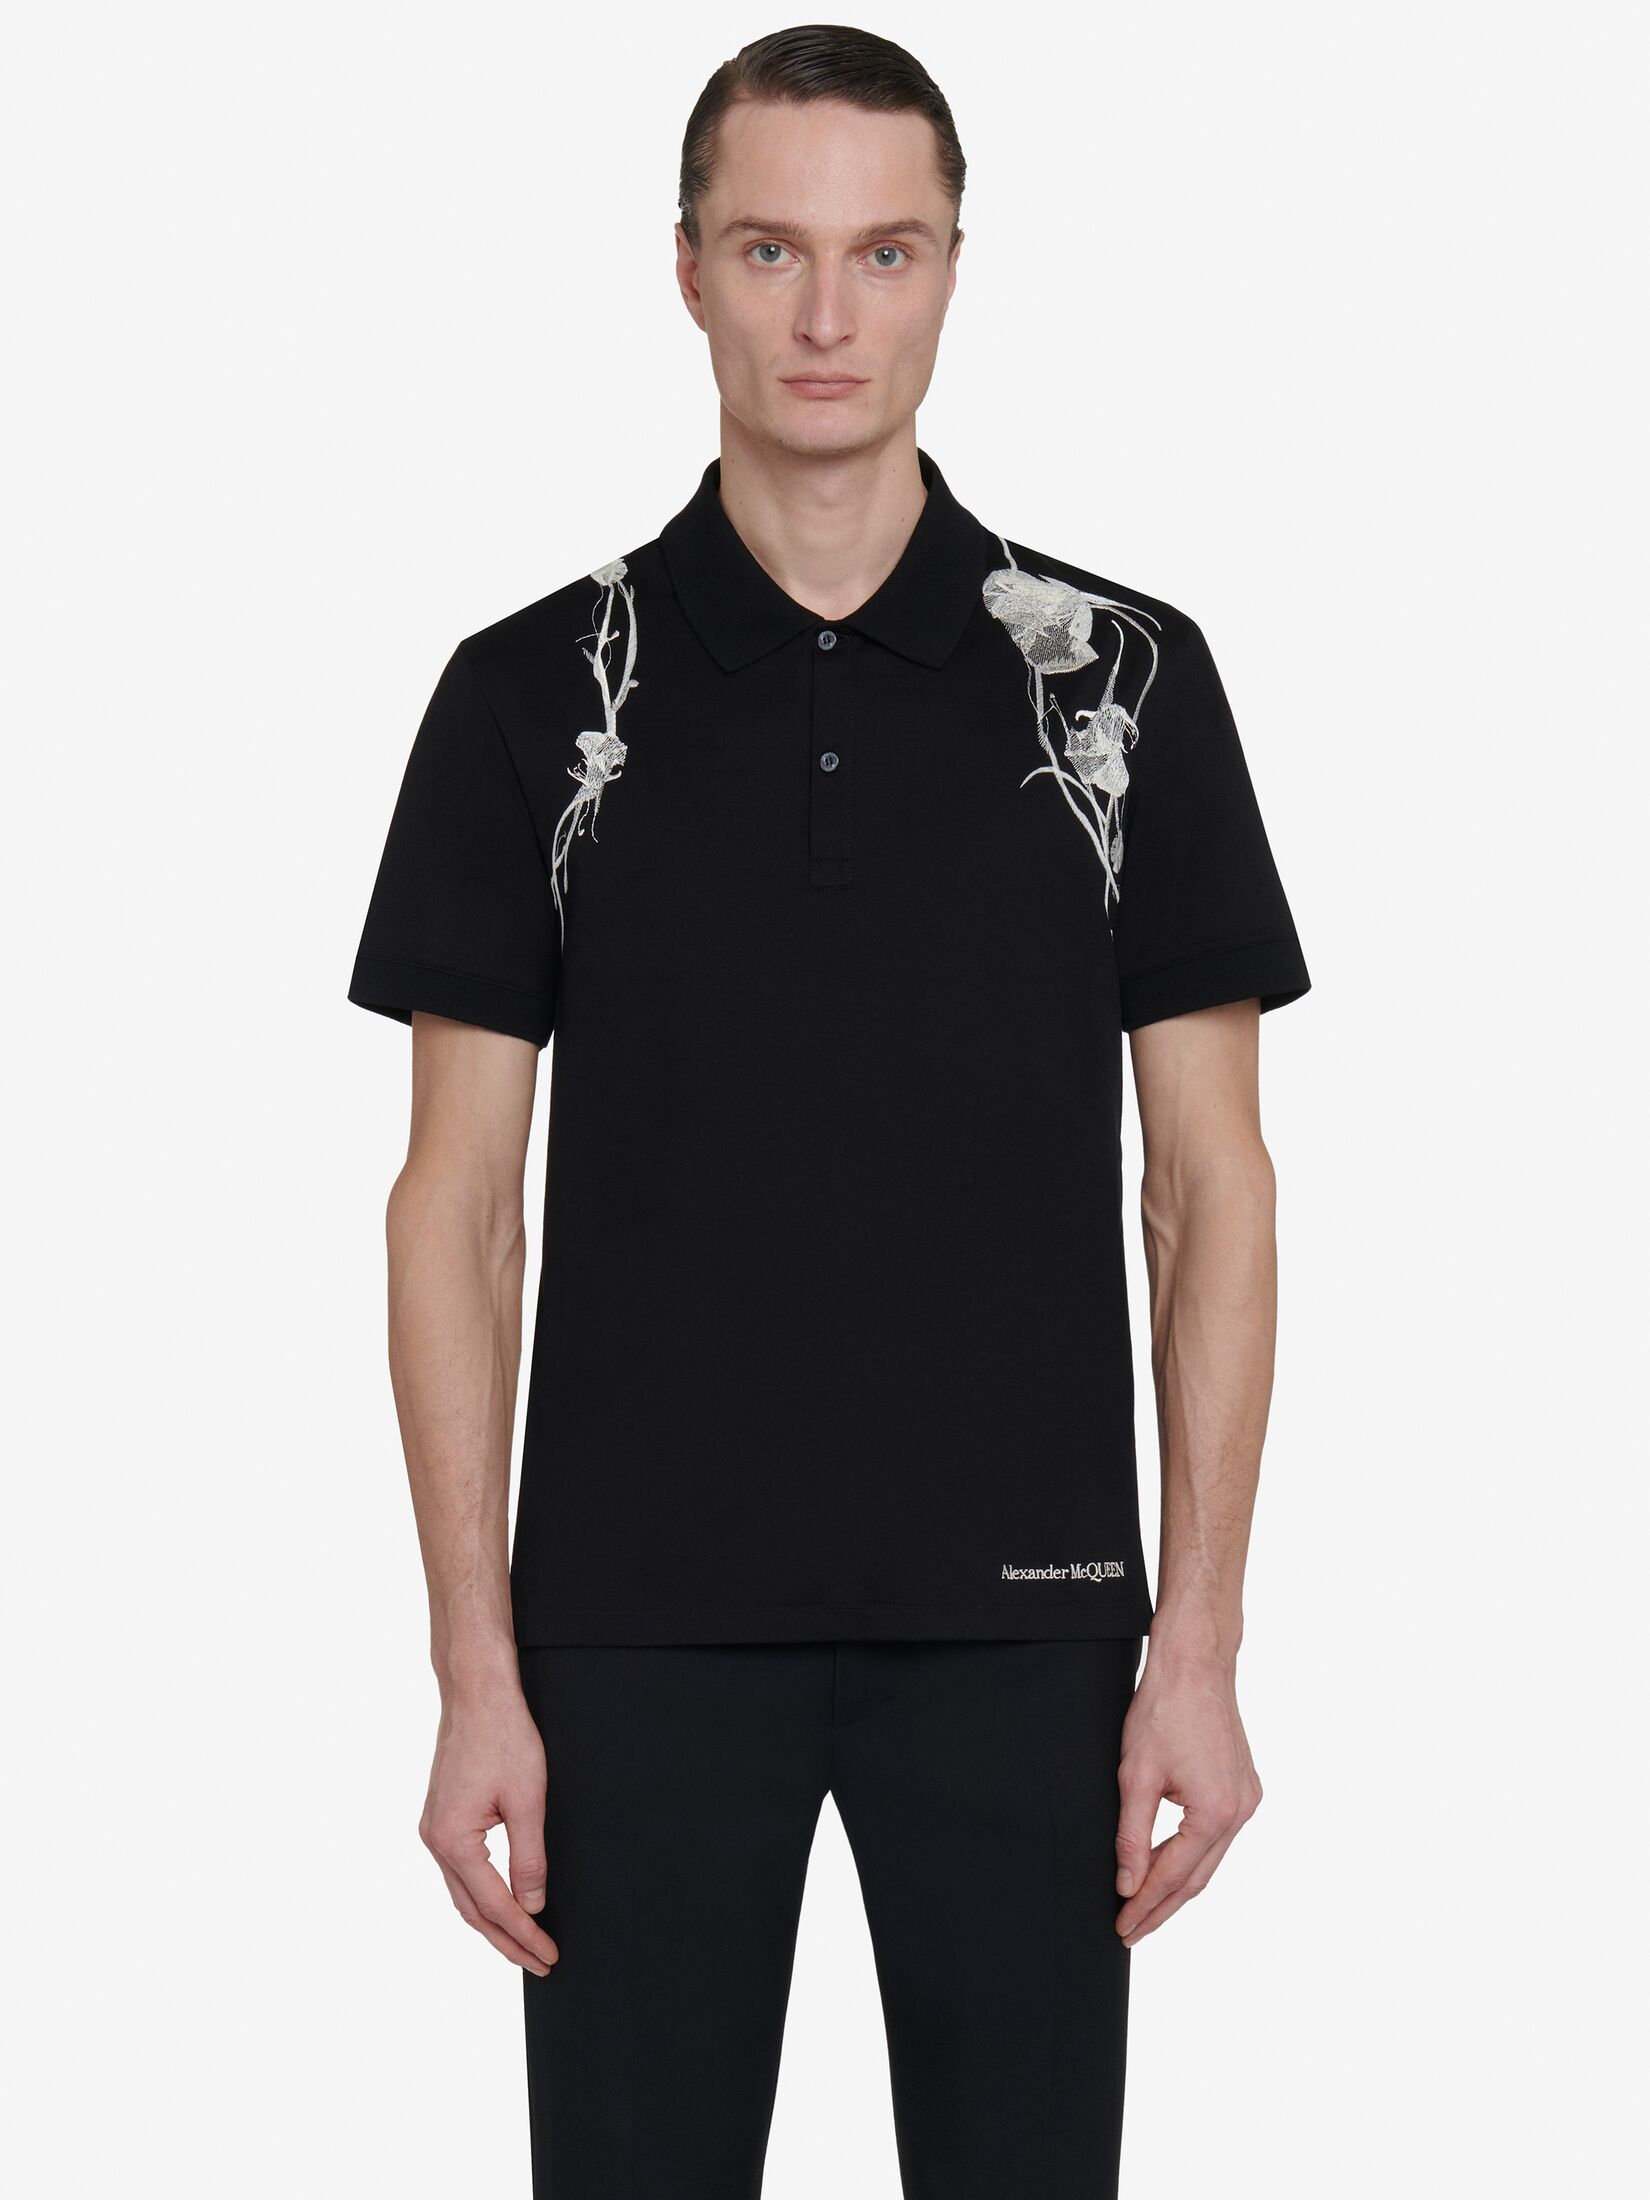 Pressed Flower Harness Polo Shirt